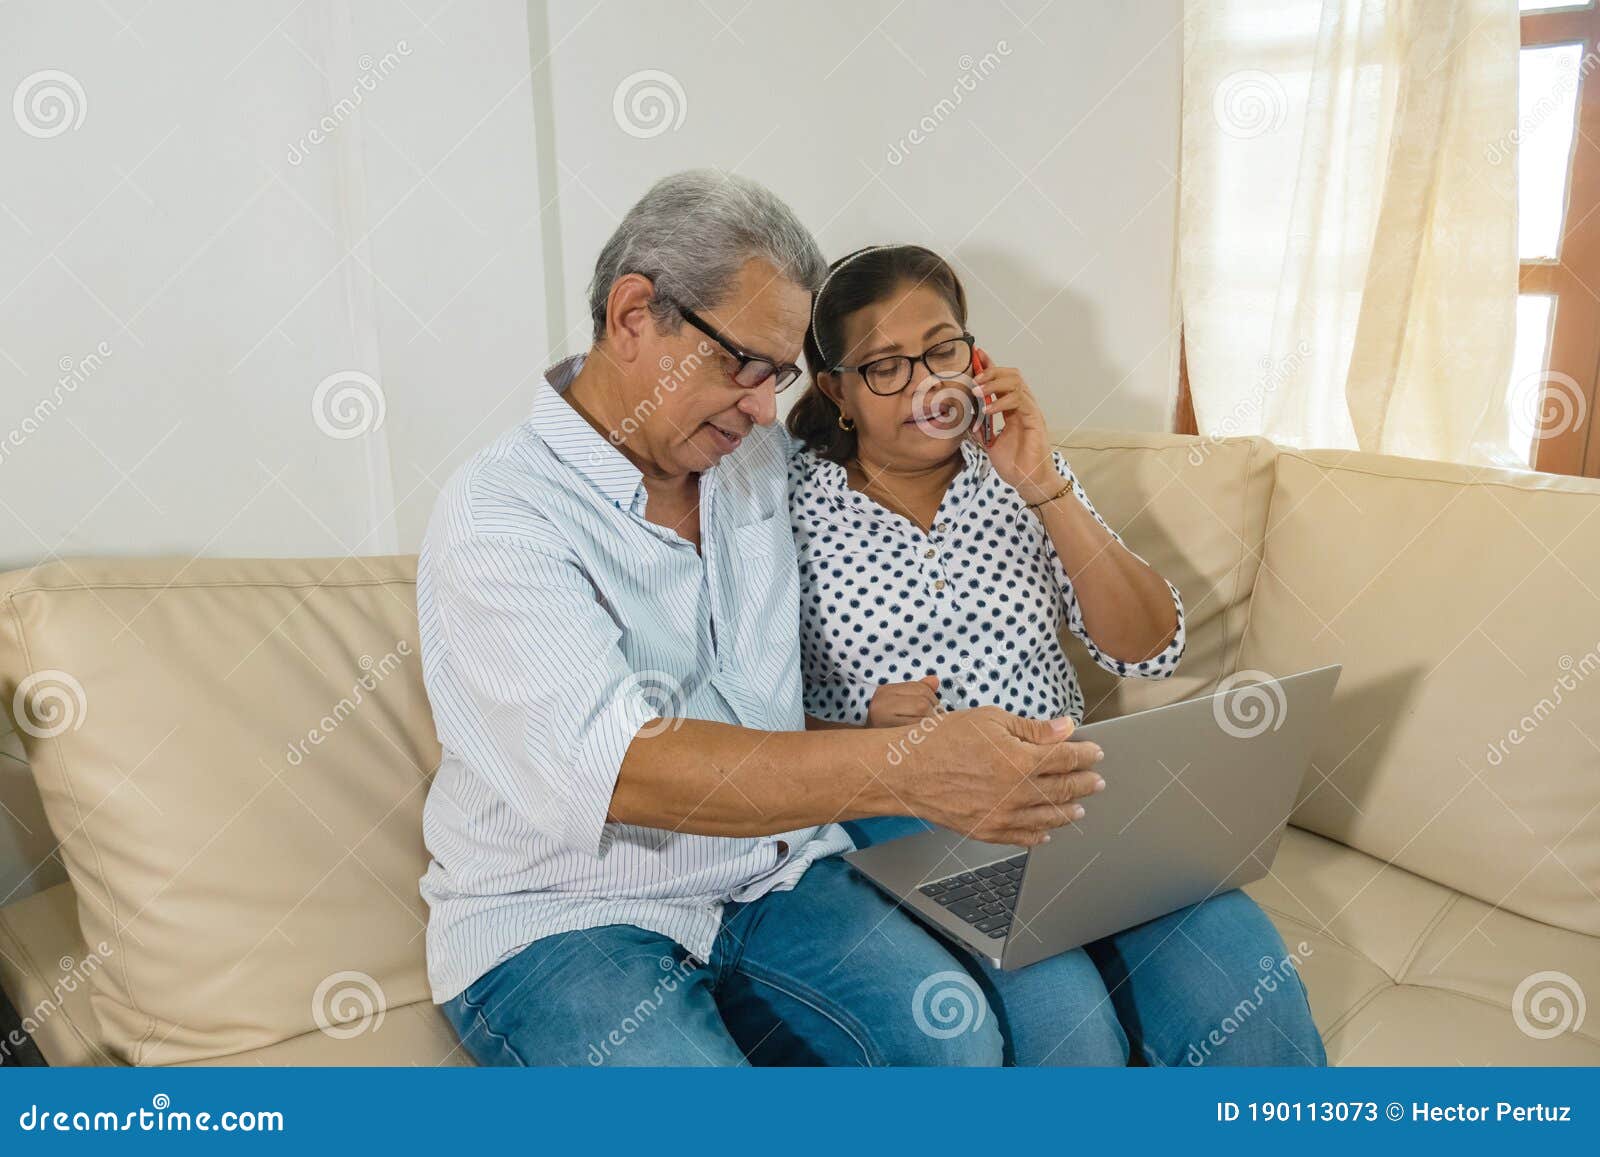 older latino web-surfing couple with laptop and cell phone.